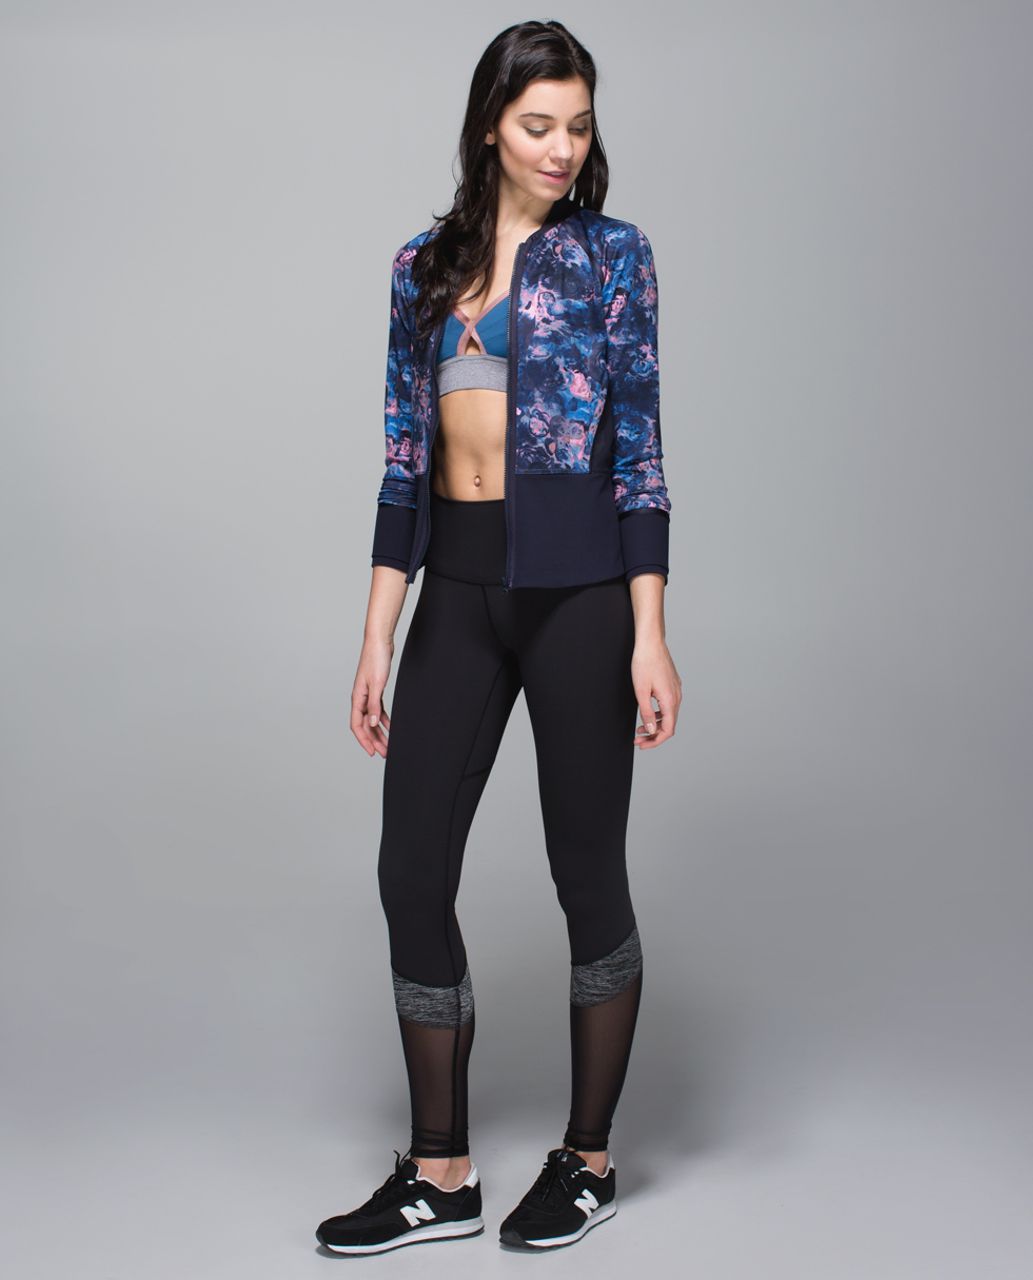 Lululemon If You're Lucky Jacket - Moody Mirage Bark Berry Deep Navy / Naval Blue